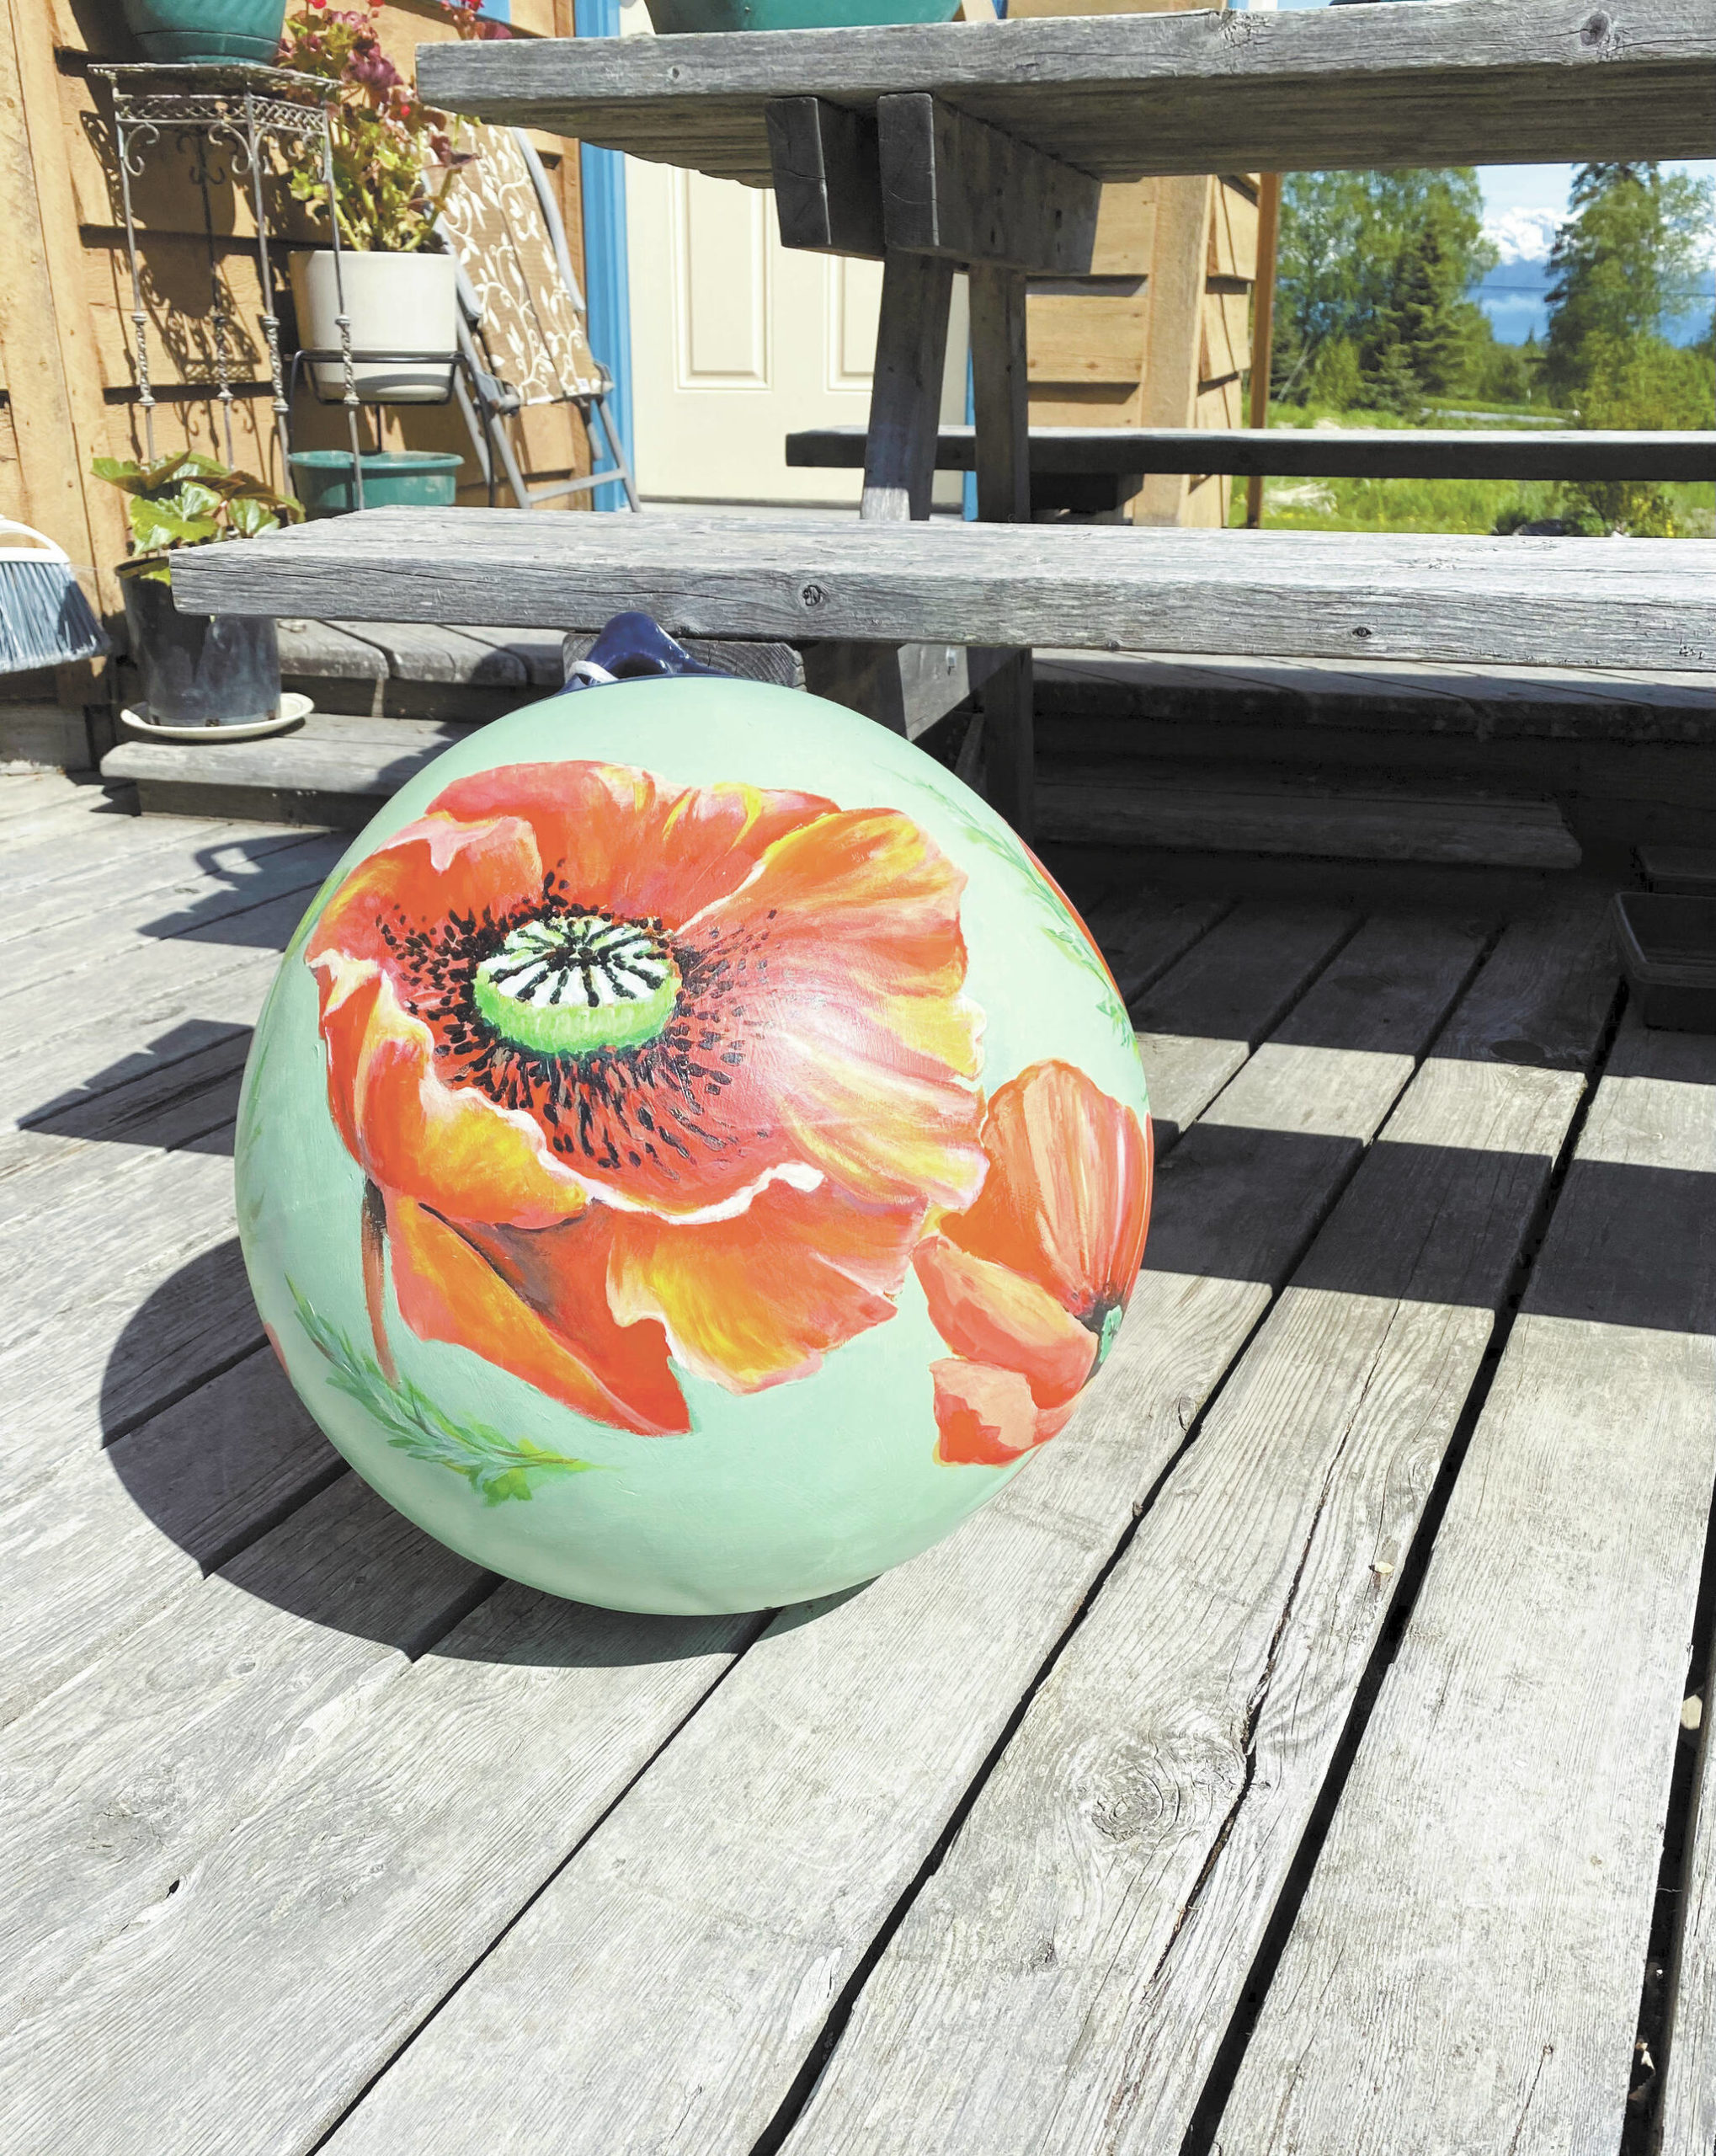 Jan Peyton and Char Jump have painted buoys like this one for a show in June at Fireweed Gallery. (Photo provided)